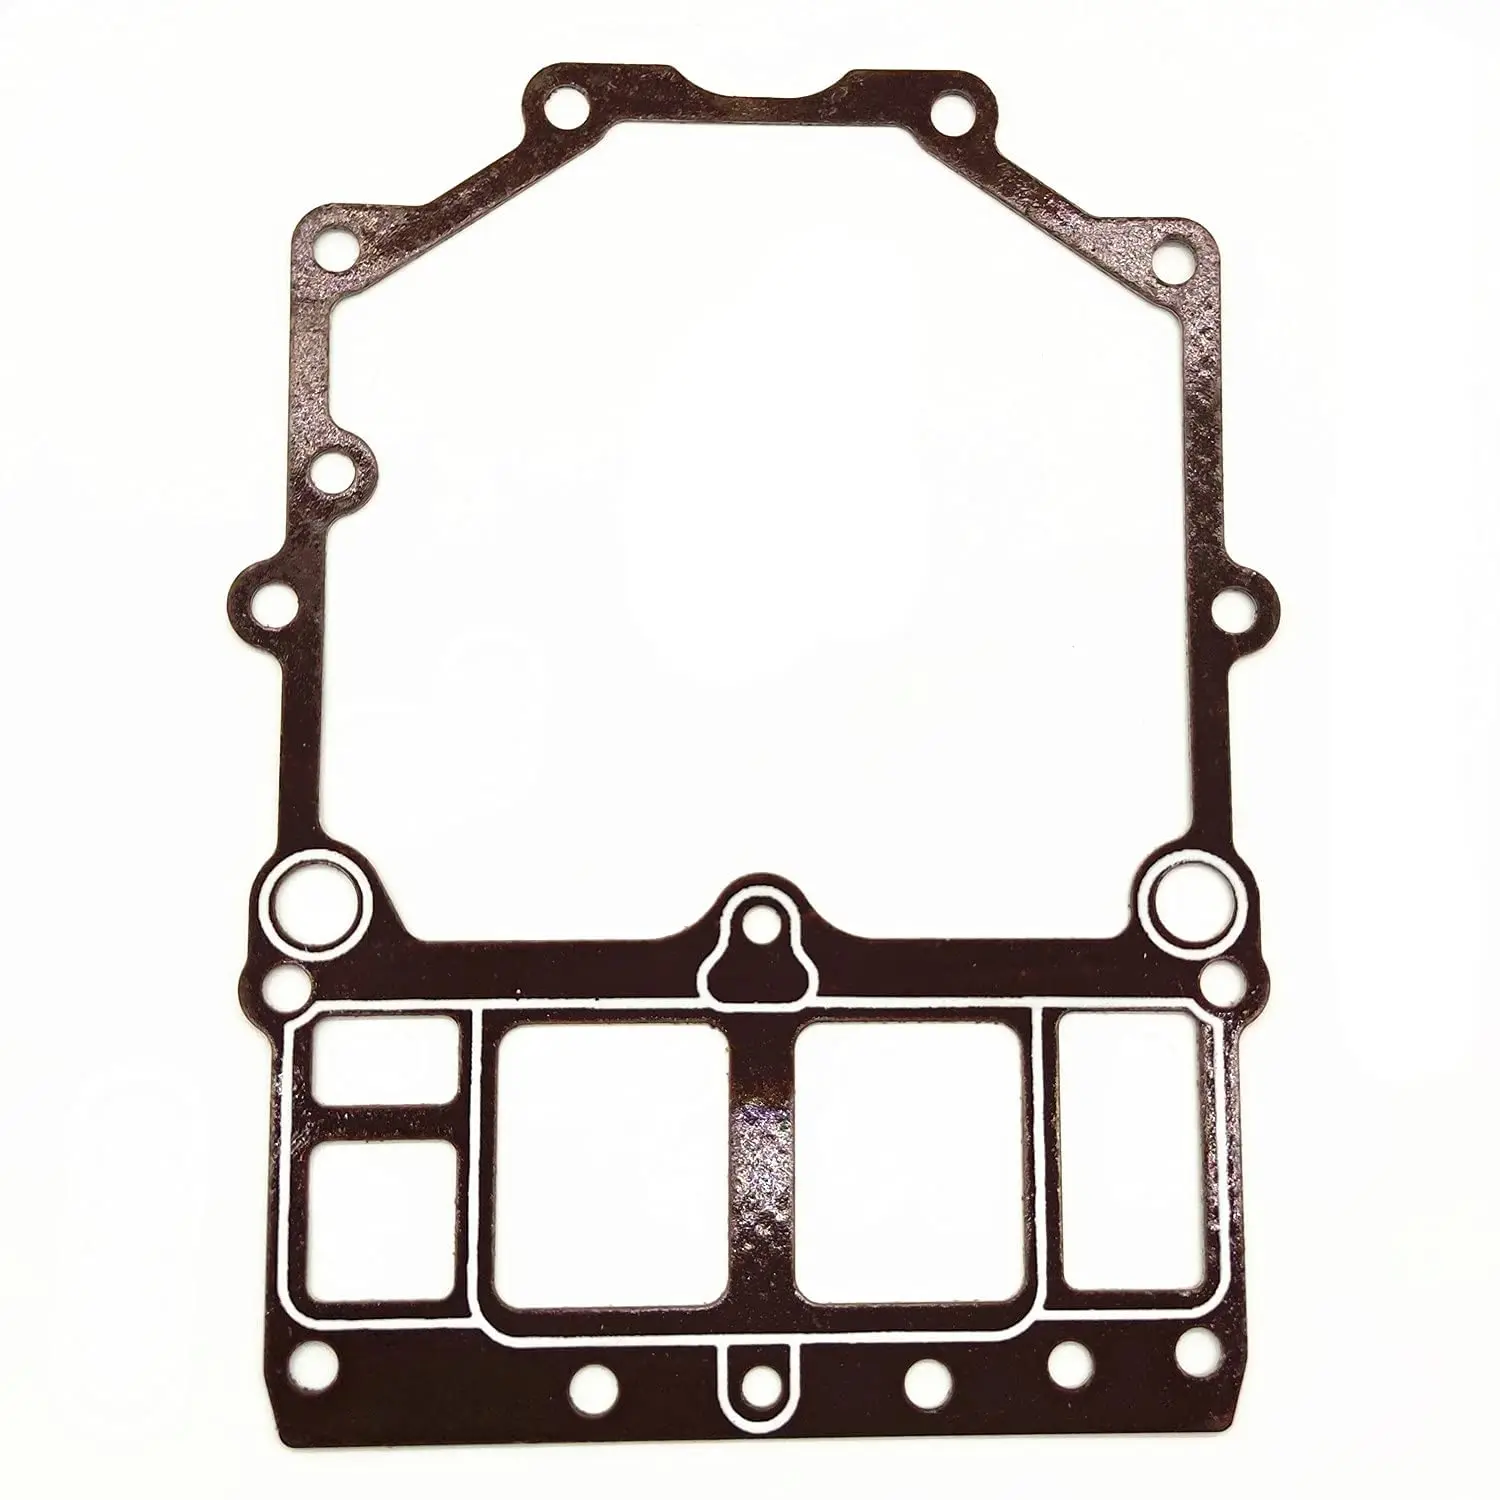 Jetunit Head Gasket for Yamaha Outboard 68F-45113-00-00 150HP 175HP 200HP(2000-2012)